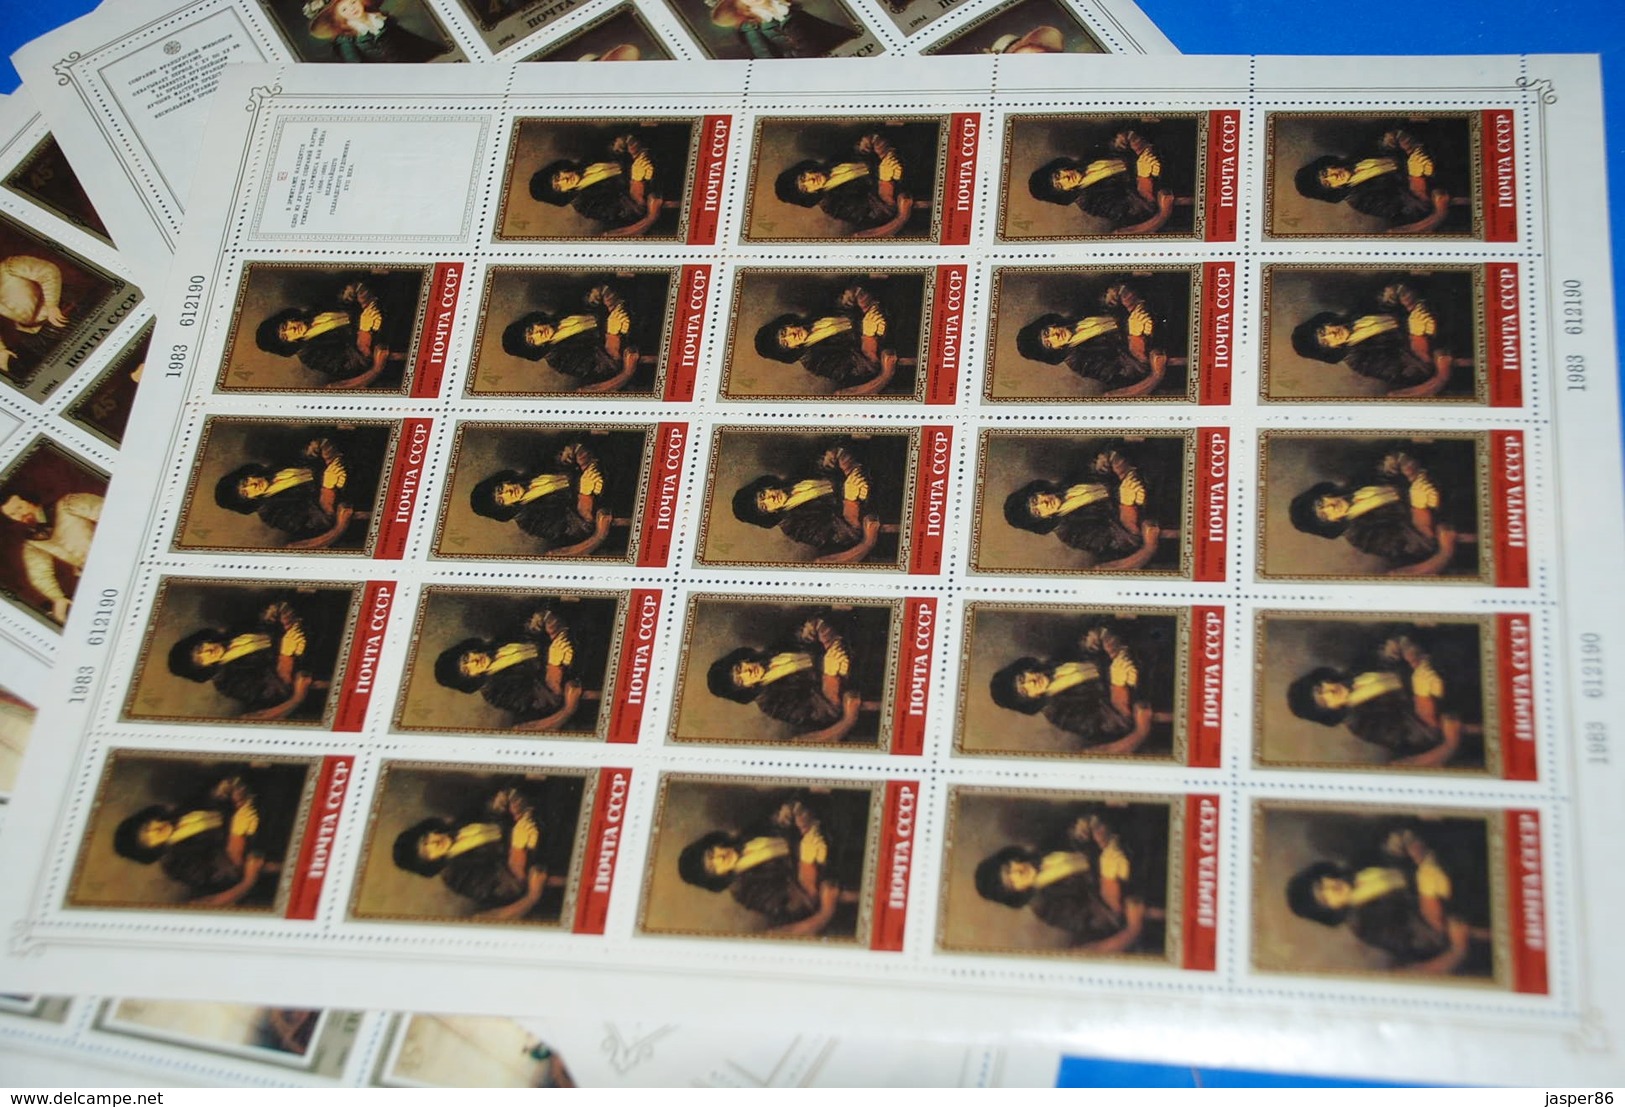 Hermitage Art Painting - England, France, Germany 8 x MNH VF Full Sheets, Russia